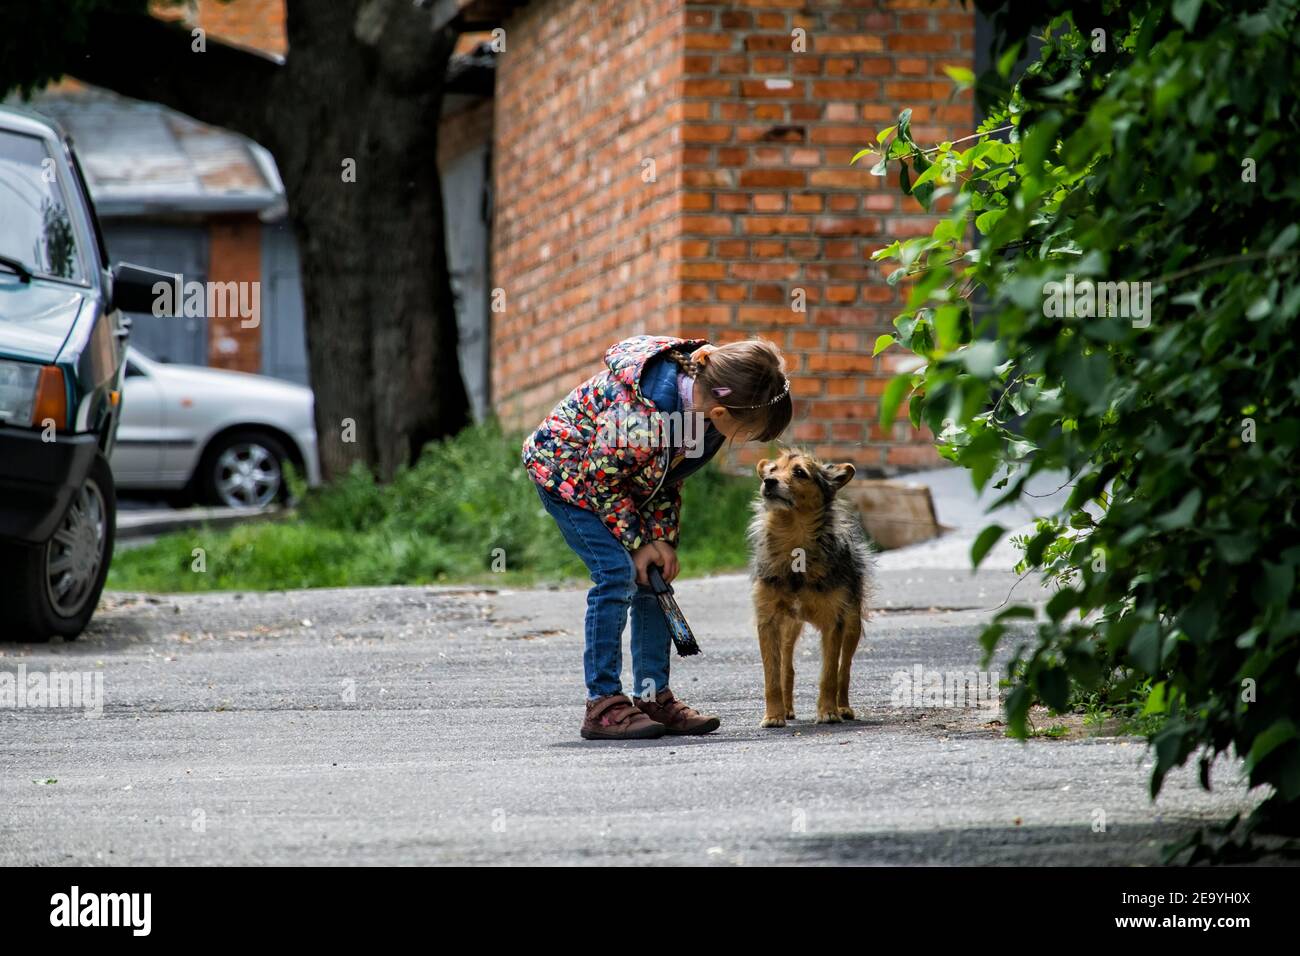 Baby girl leaned towards a stray dog and explains something to her. The dog listens attentively to the girl Stock Photo